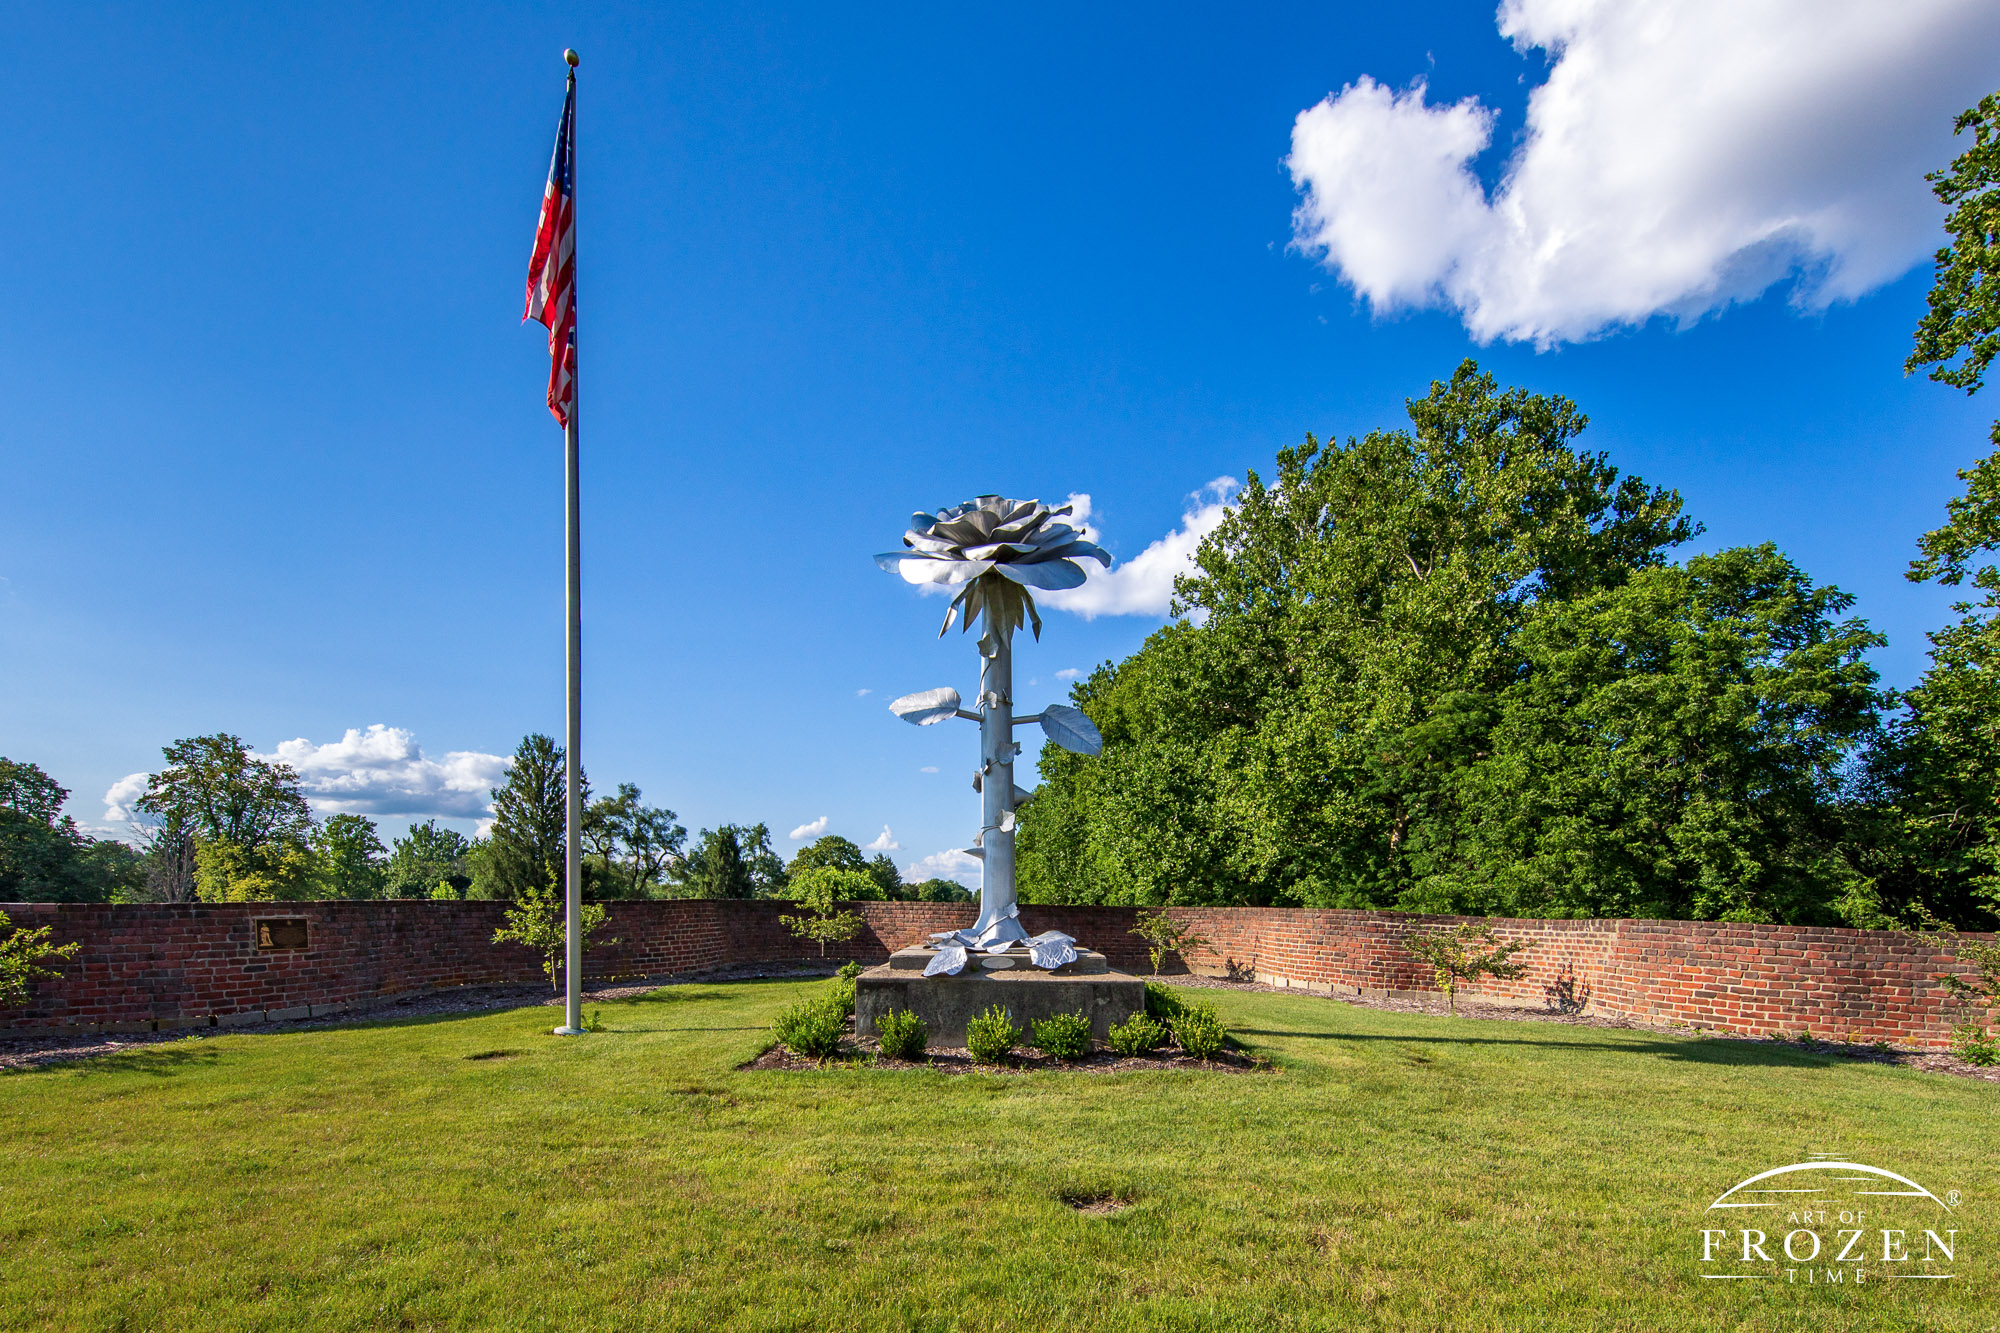 A fifteen-foot aluminum sculpture of a rose standing at the entrance of Snyder Park, that celebrates Springfield, Ohio’s nickname.